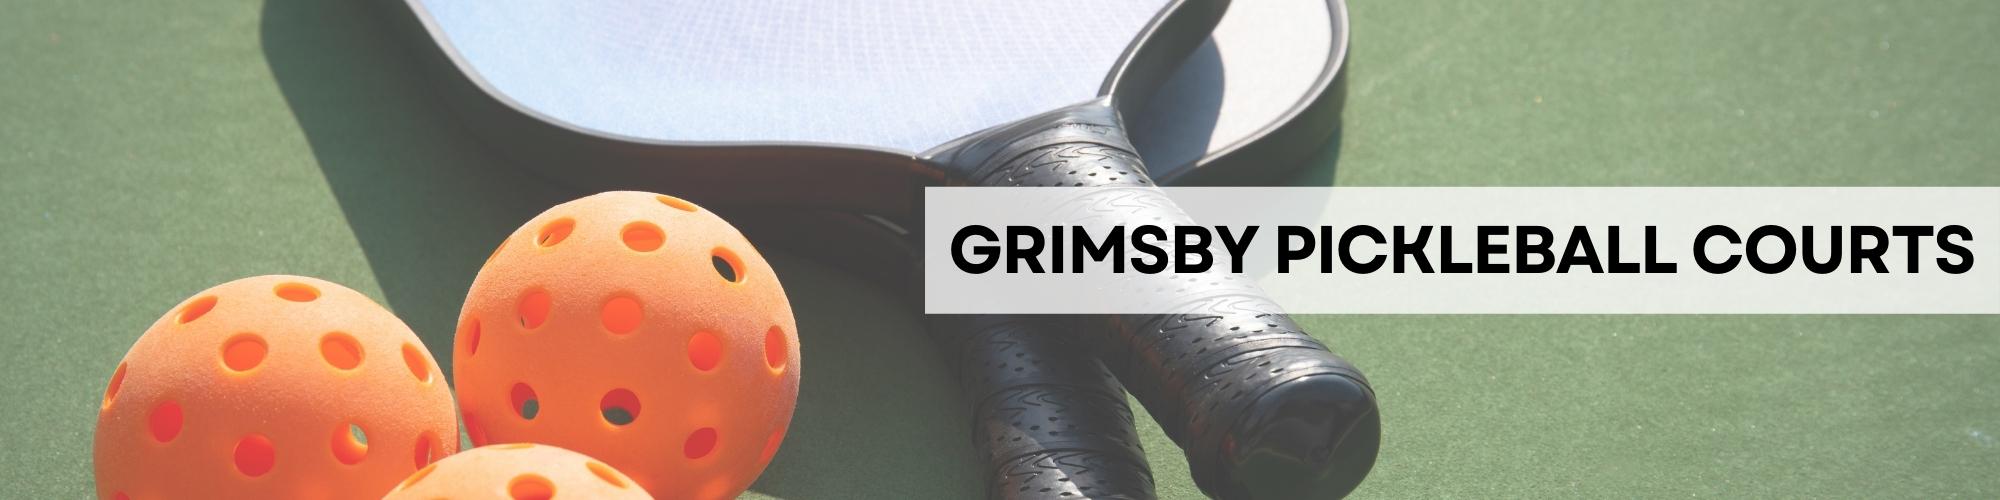 Pickleball Grimsby Project